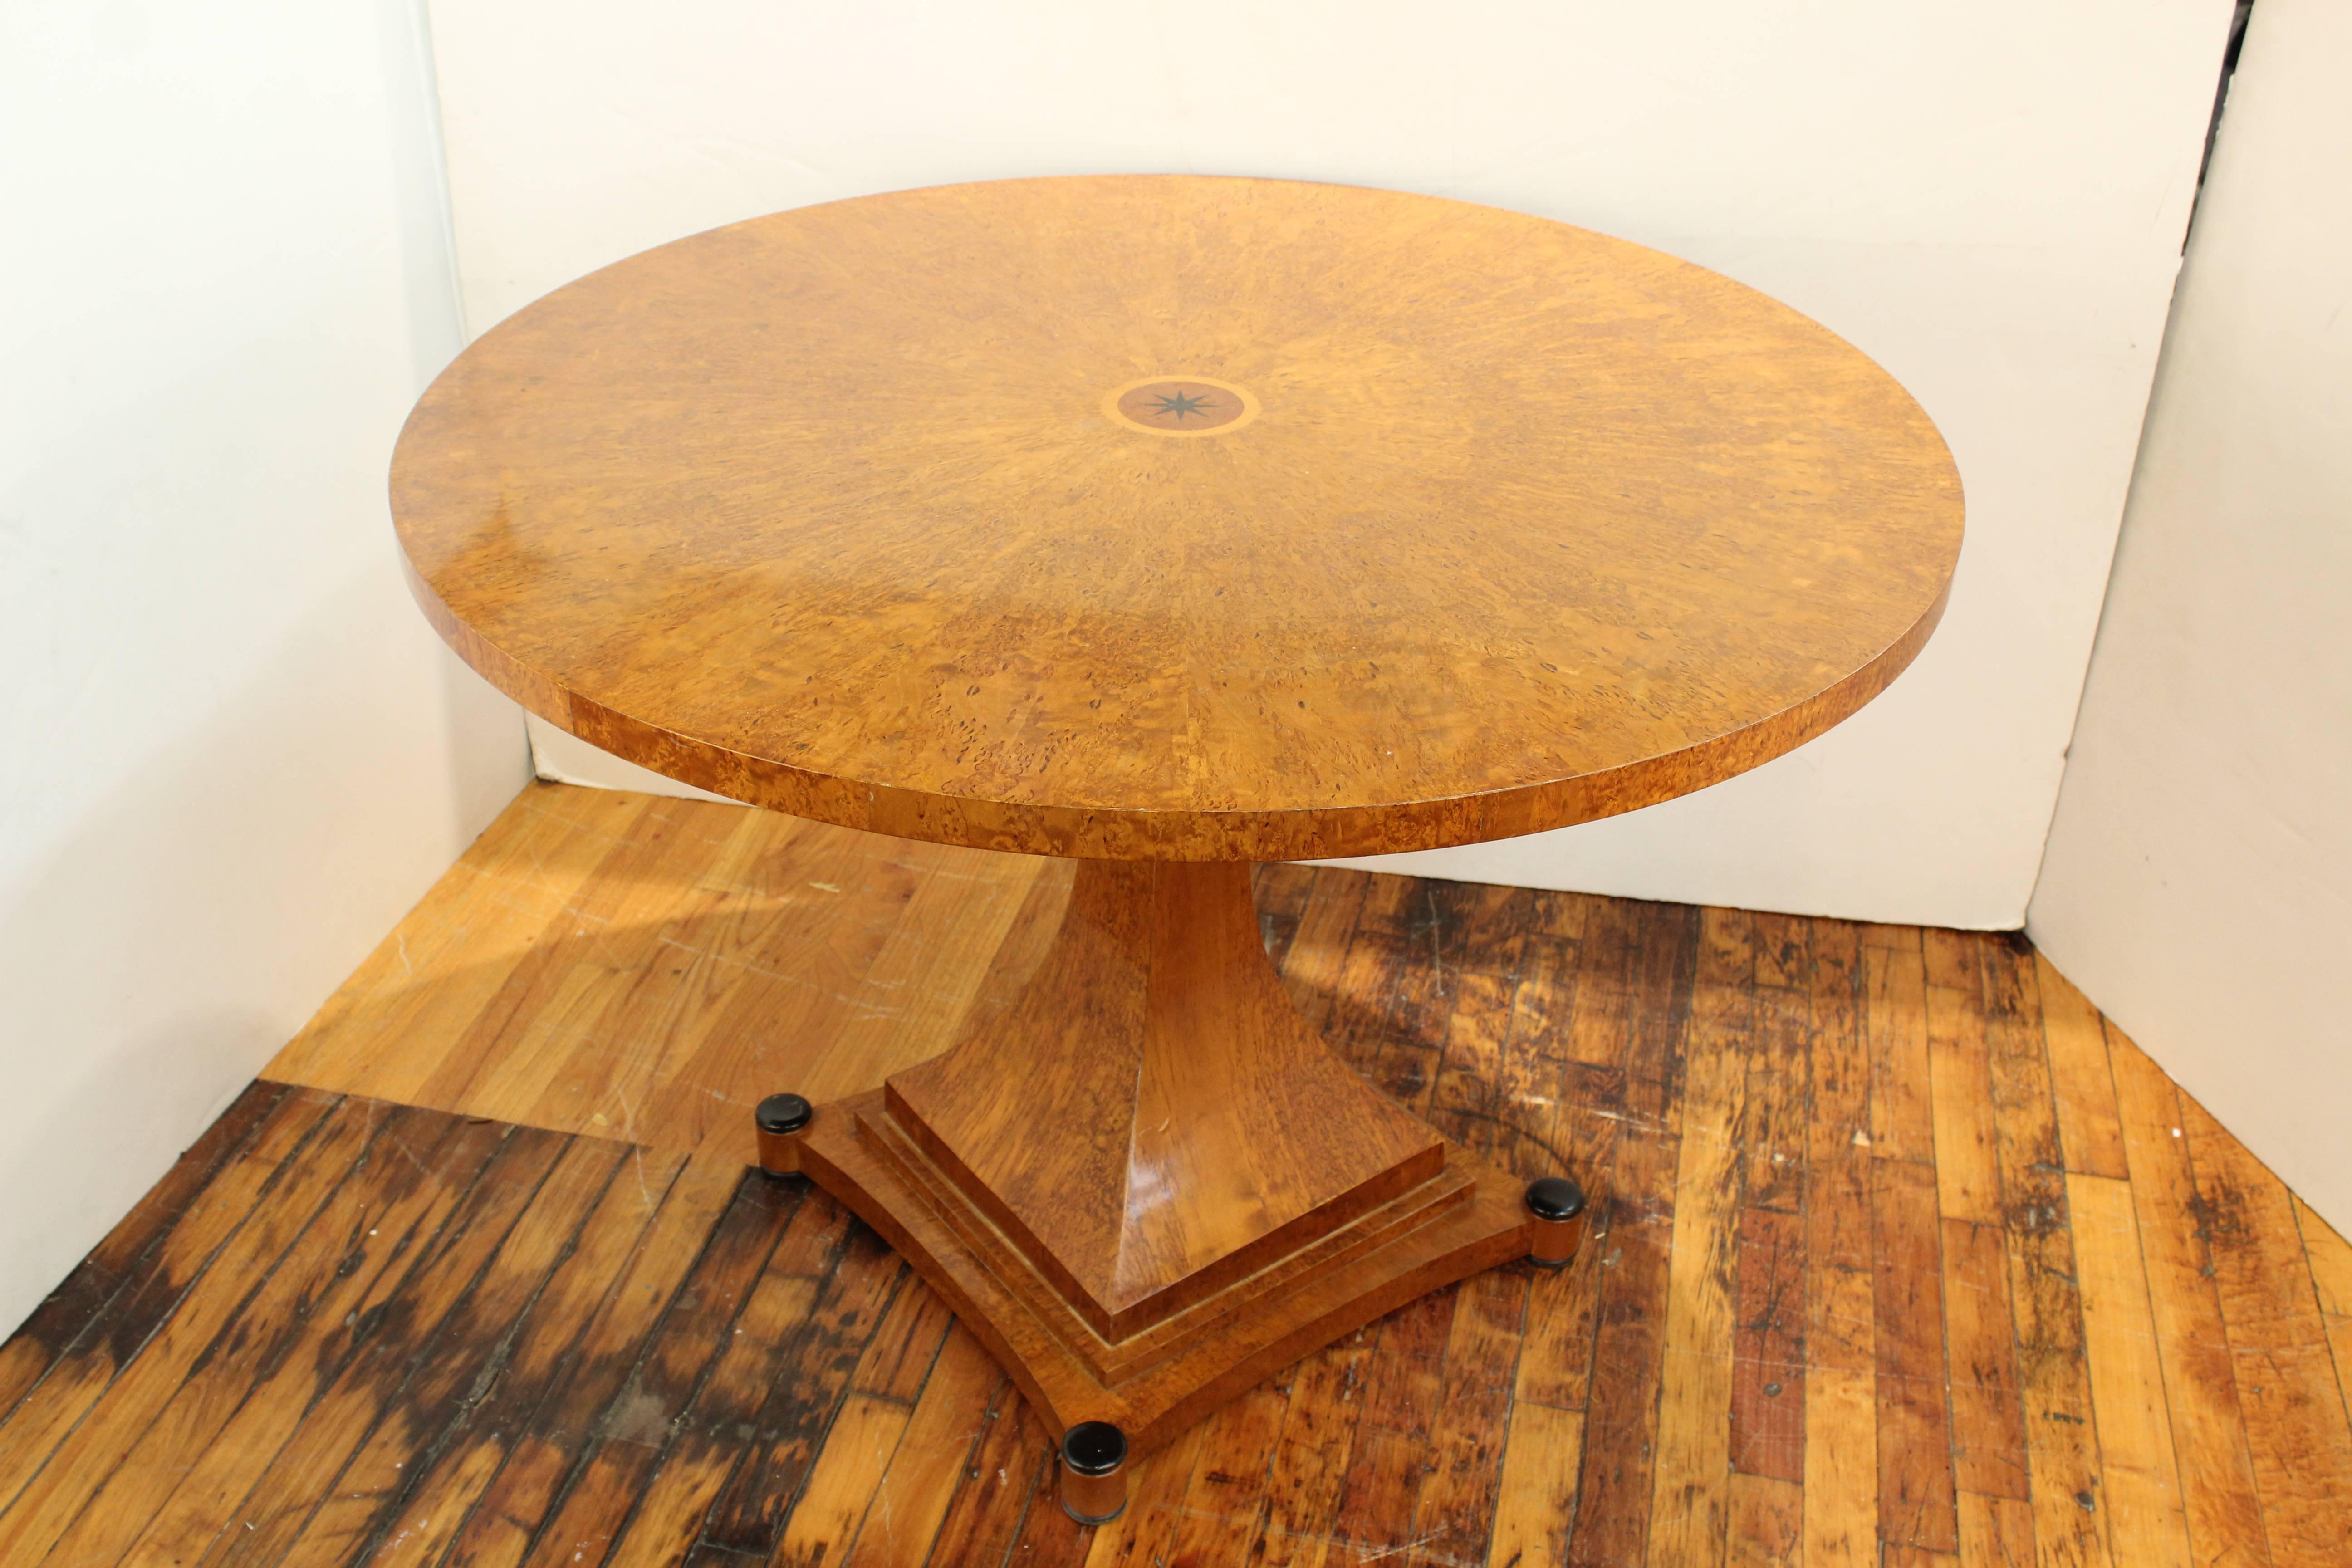 A dining table from the Art Deco period. Crafted in burl wood with geometric detail. Features a round face on a single leg atop a stepped square base. Wear consistent with age and use. The table is in good condition.